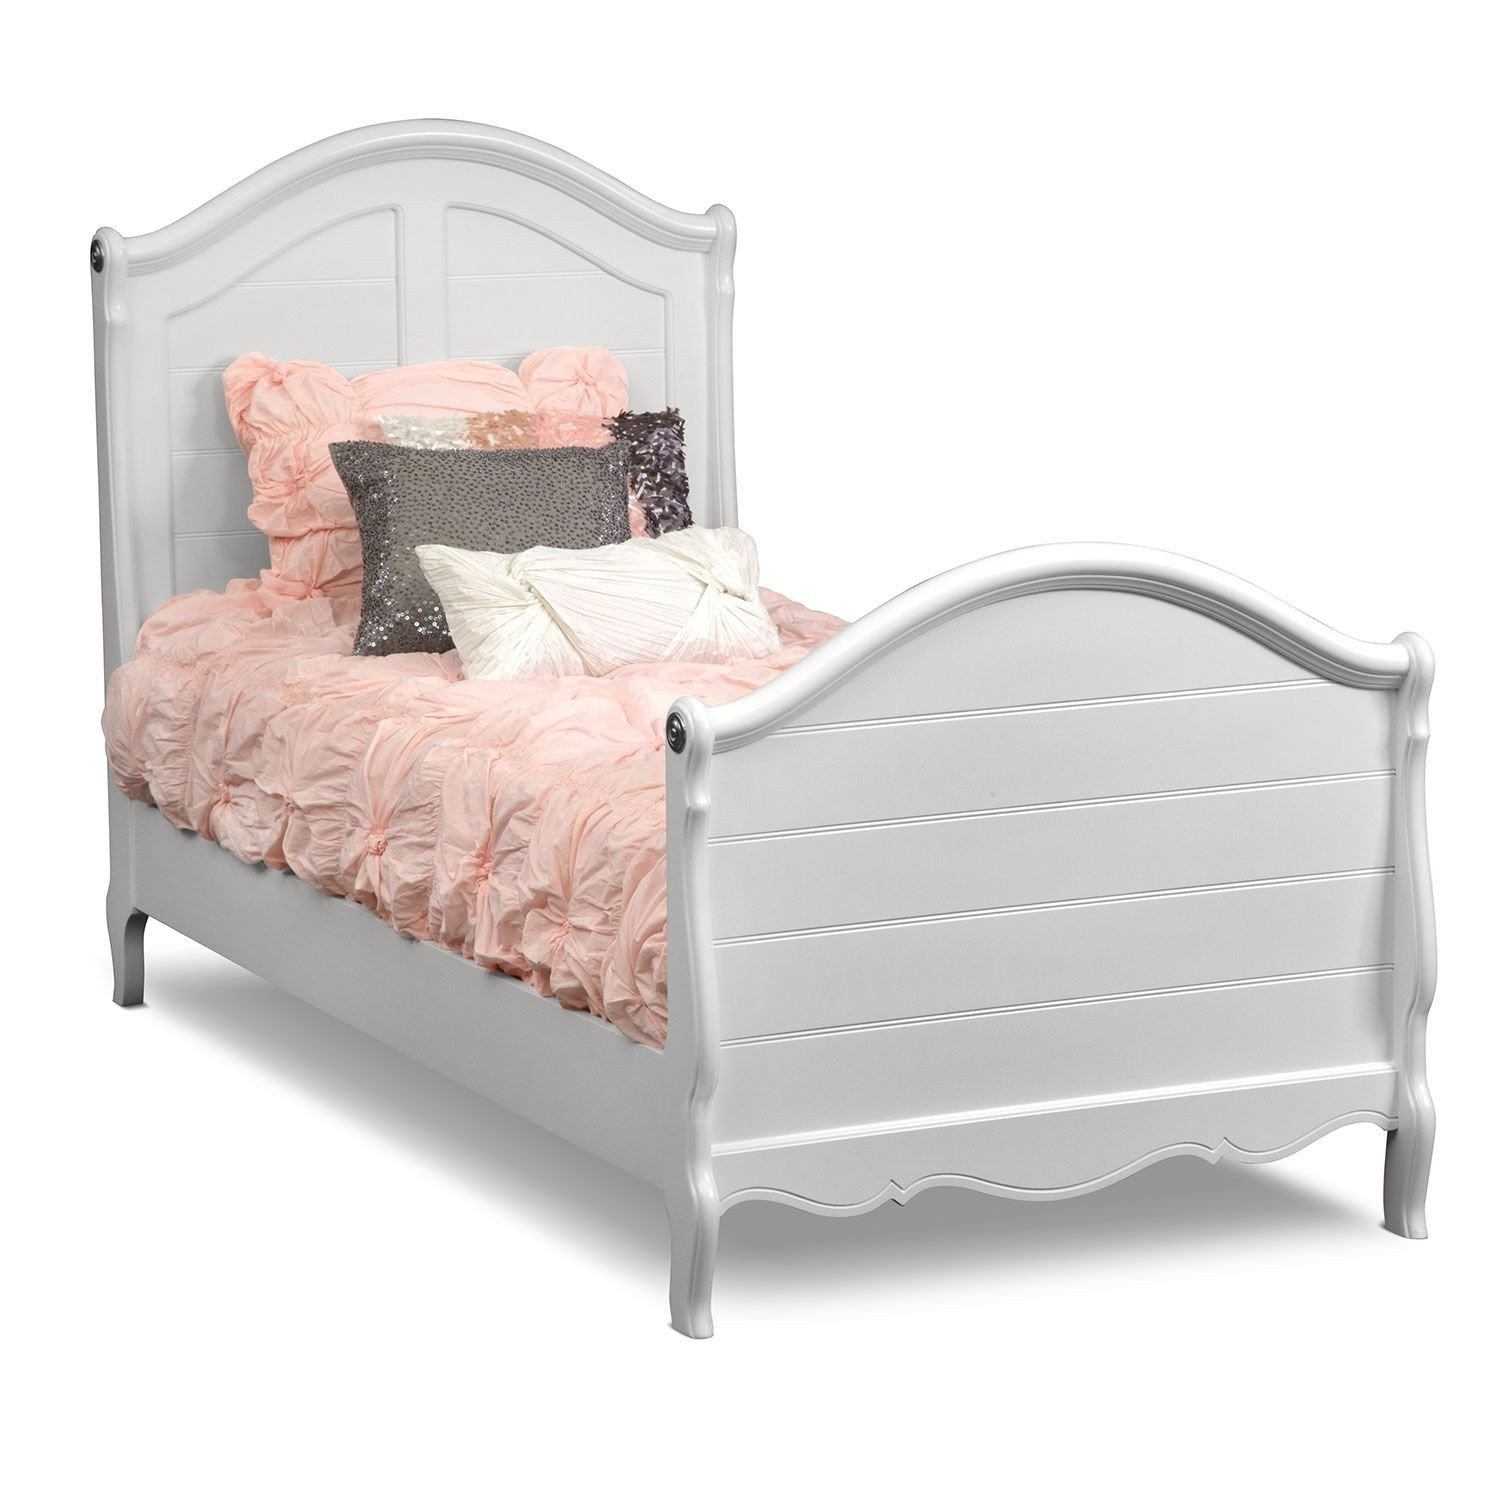 Value City Bedroom Set New Carly Twin Bed